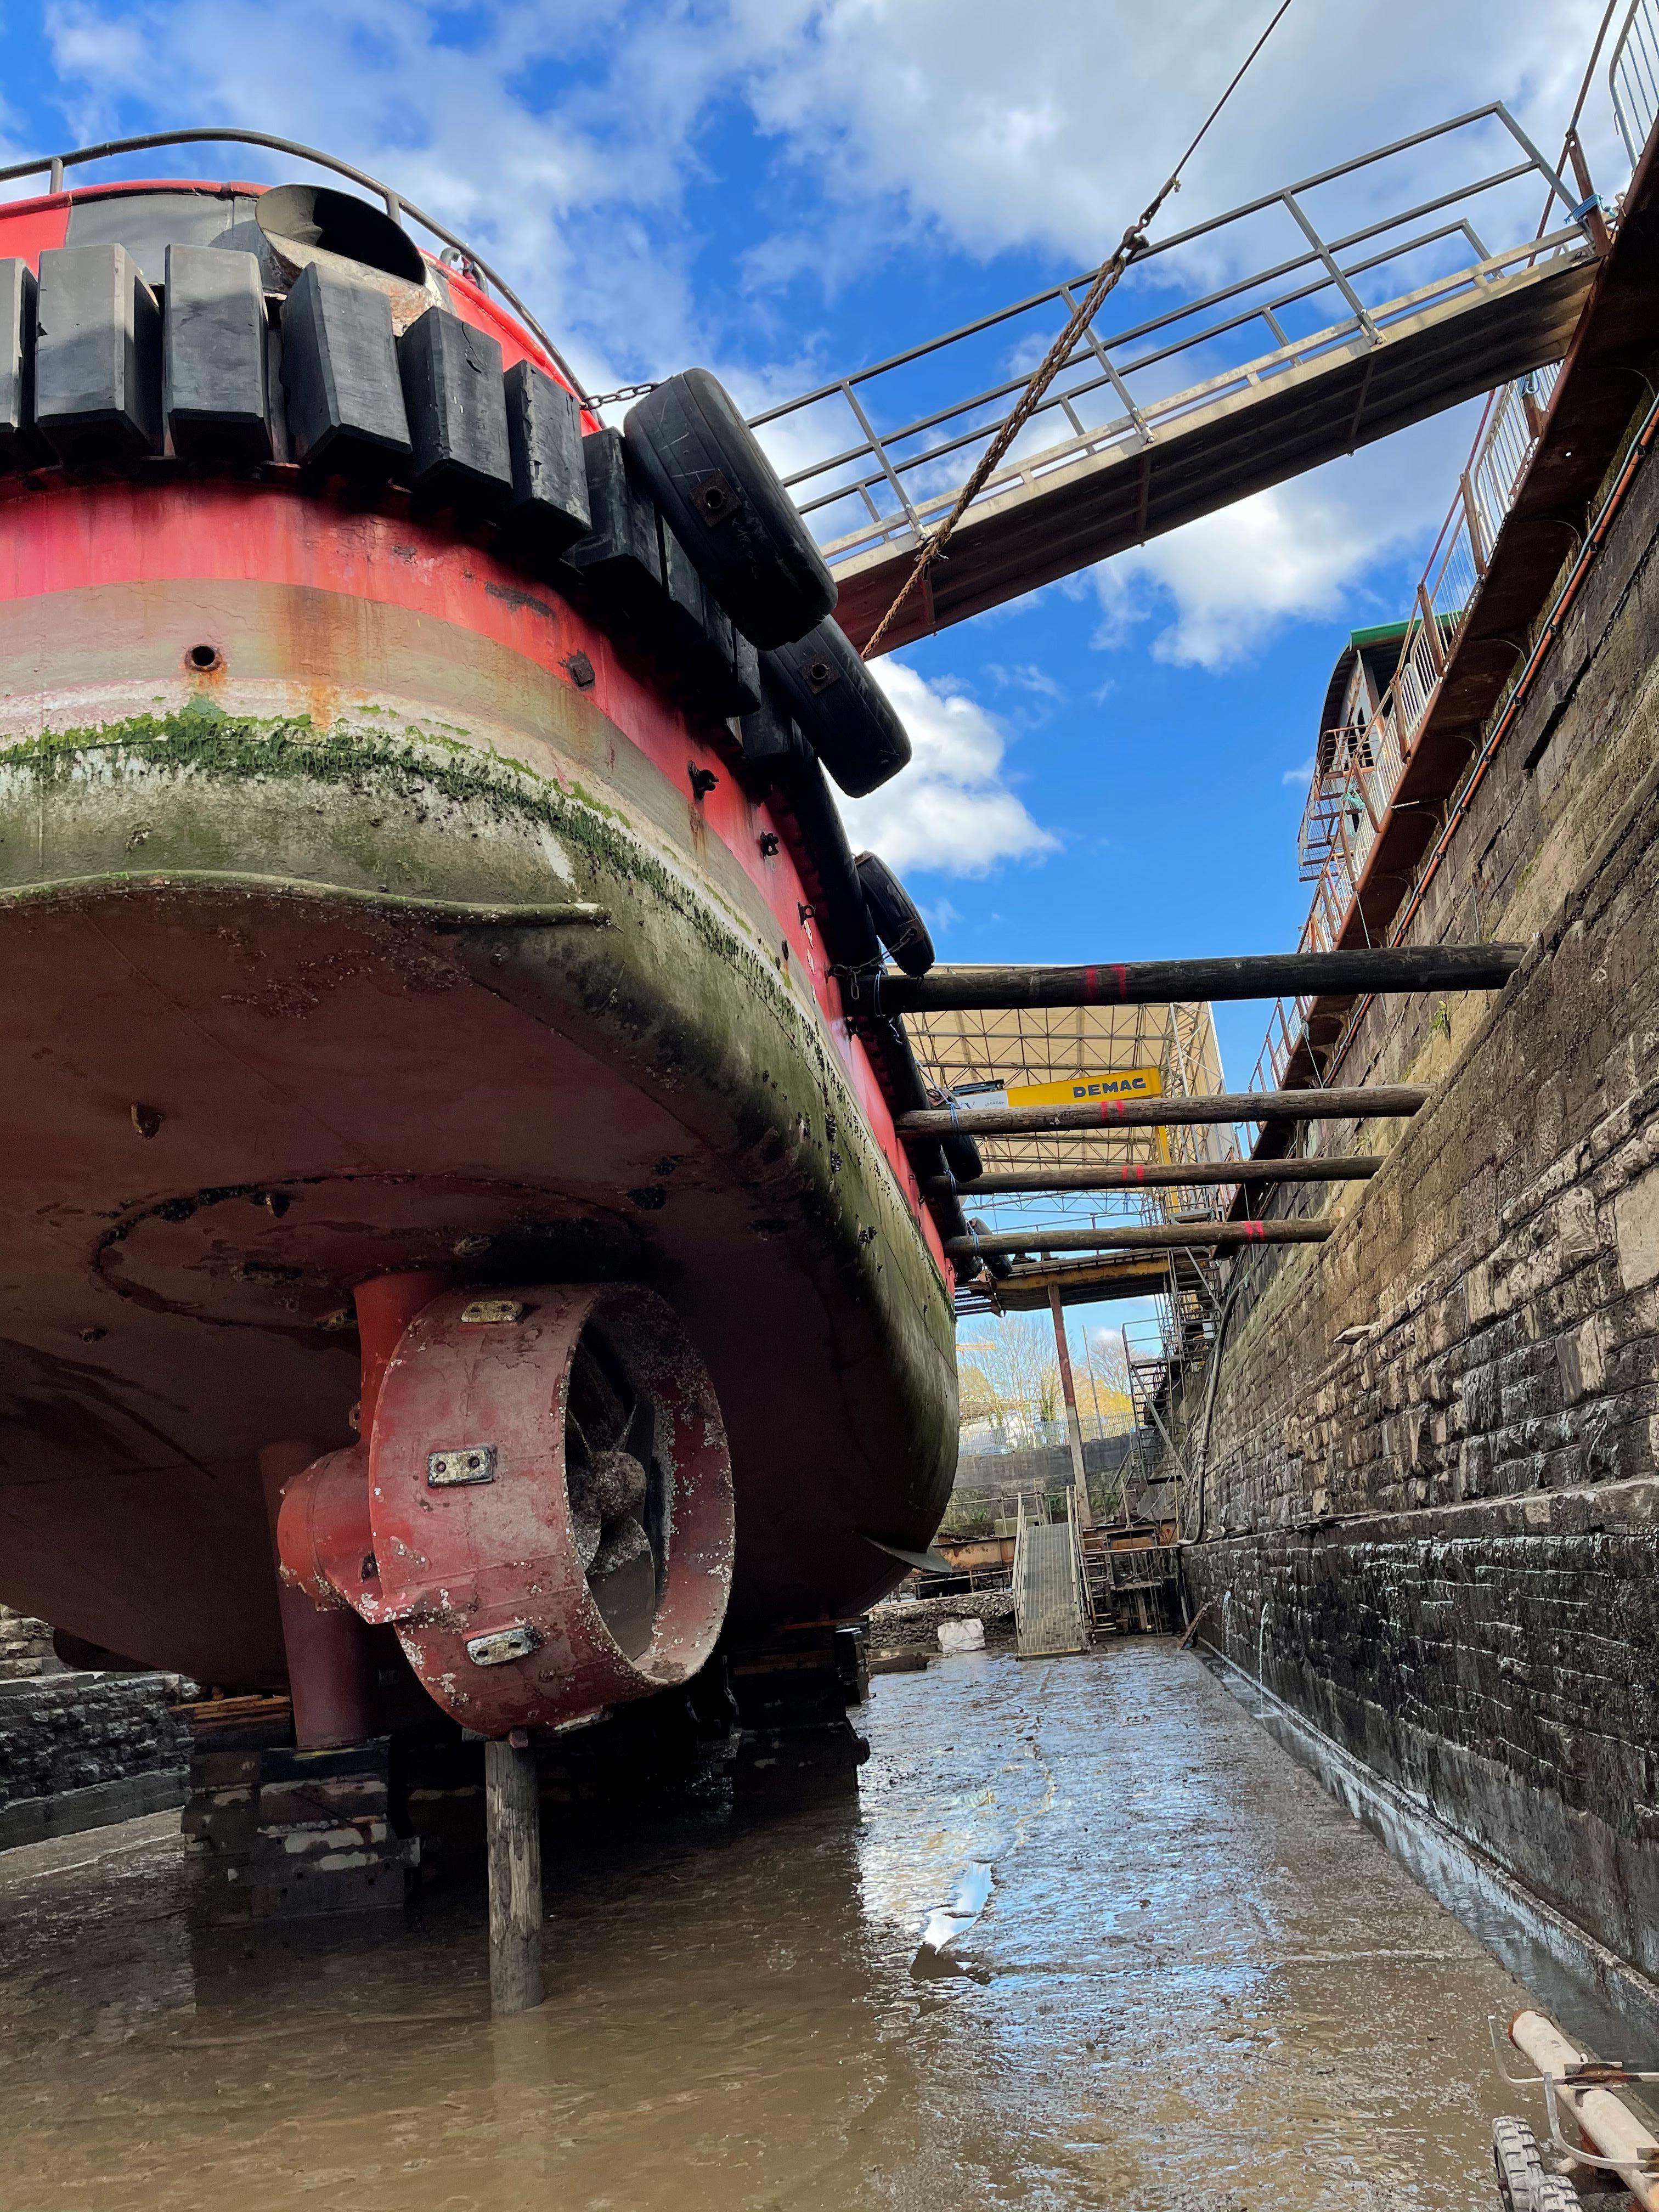 red boat against blue sky in dry dock